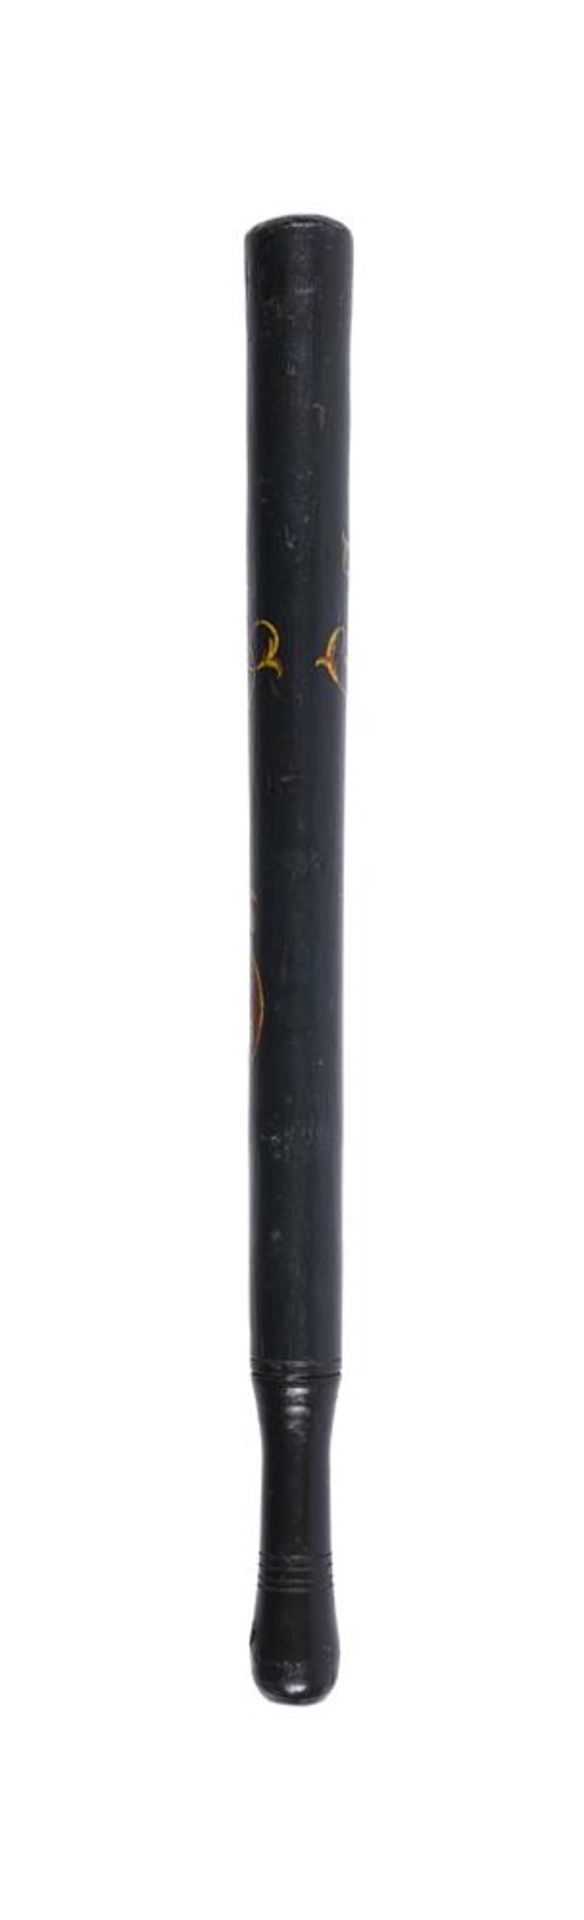 A WILLIAM IV PAINTED WOOD SPECIAL CONSTABLE'S TRUNCHEON - Image 2 of 2